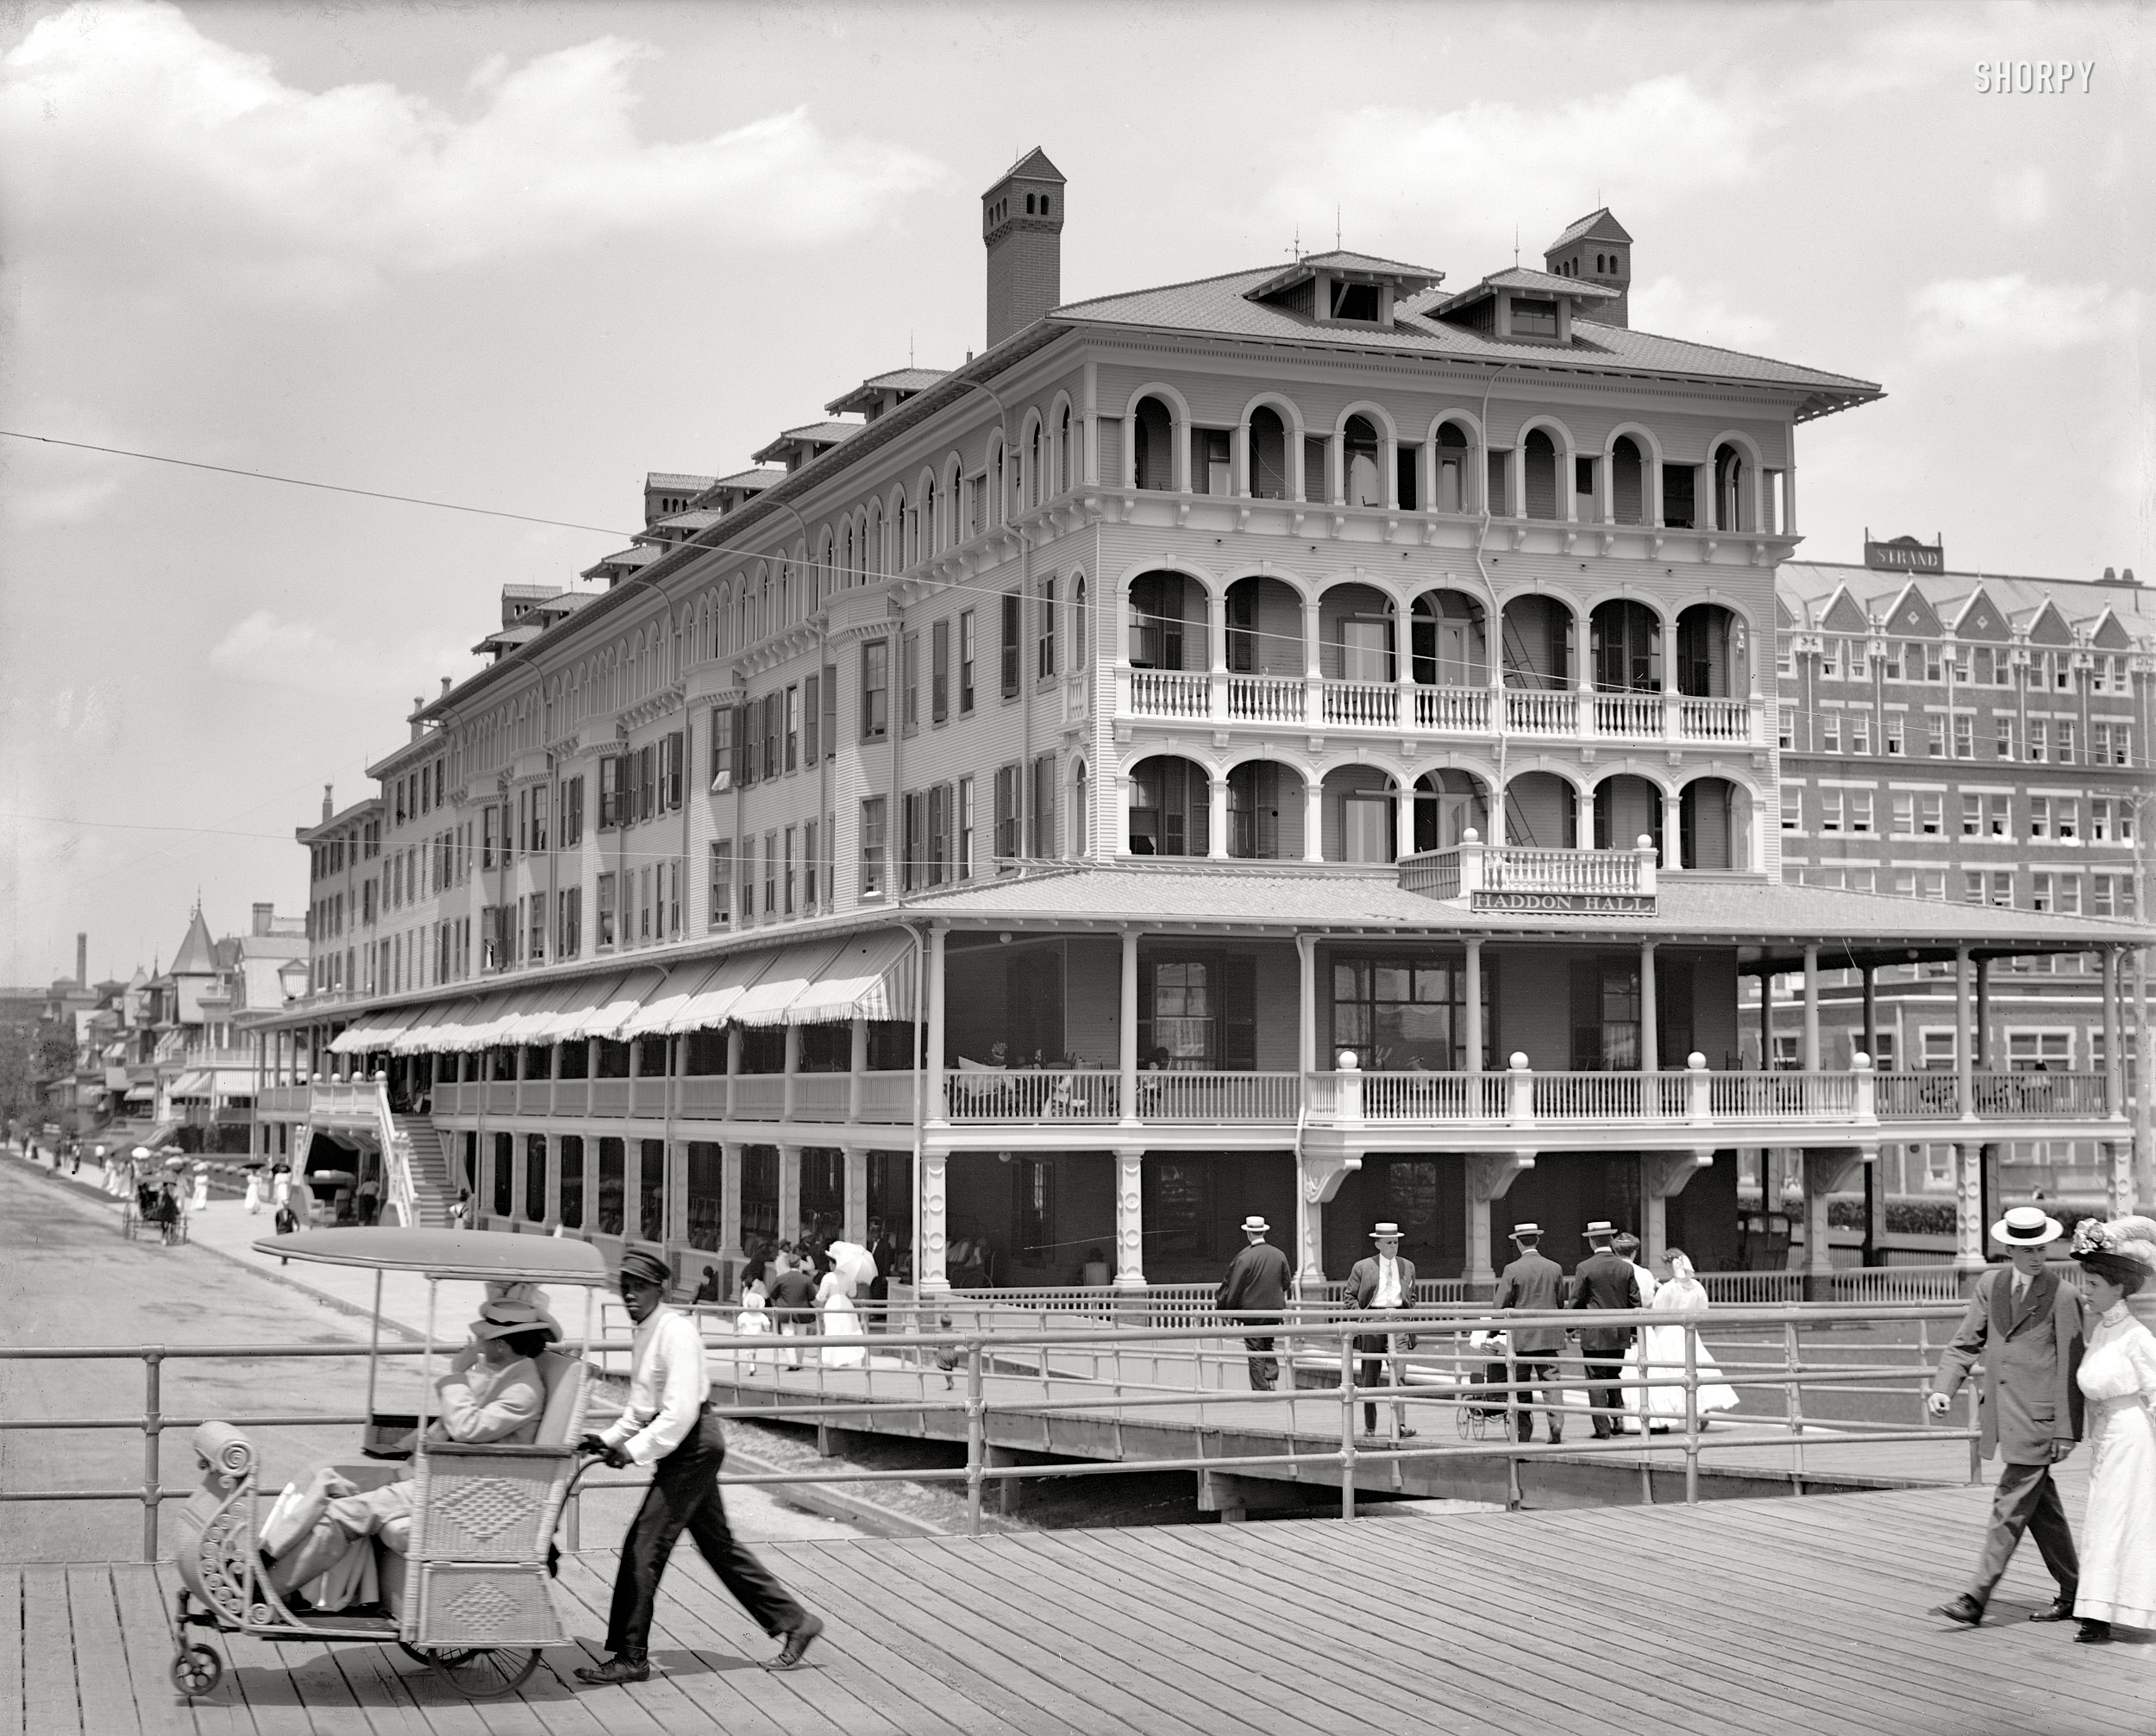 The Jersey Shore circa 1907. "Haddon Hall and Boardwalk, Atlantic City." 8x10 inch dry plate glass negative, Detroit Publishing Company. View full size.